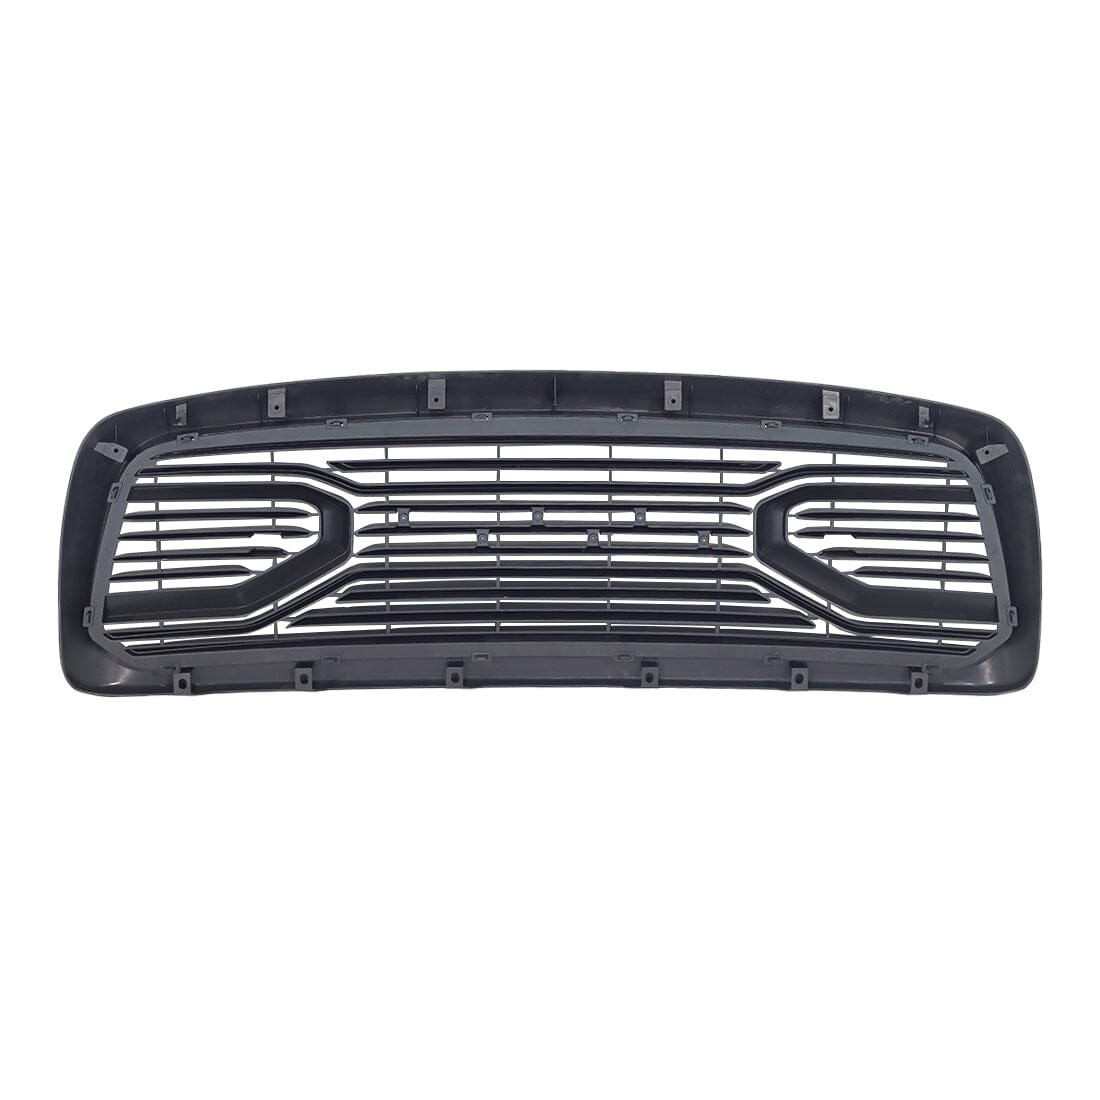 Big Horn Style Front Grille W/Amber-Matte Black For 2002-2005 Dodge Ram 1500| Amoffroad